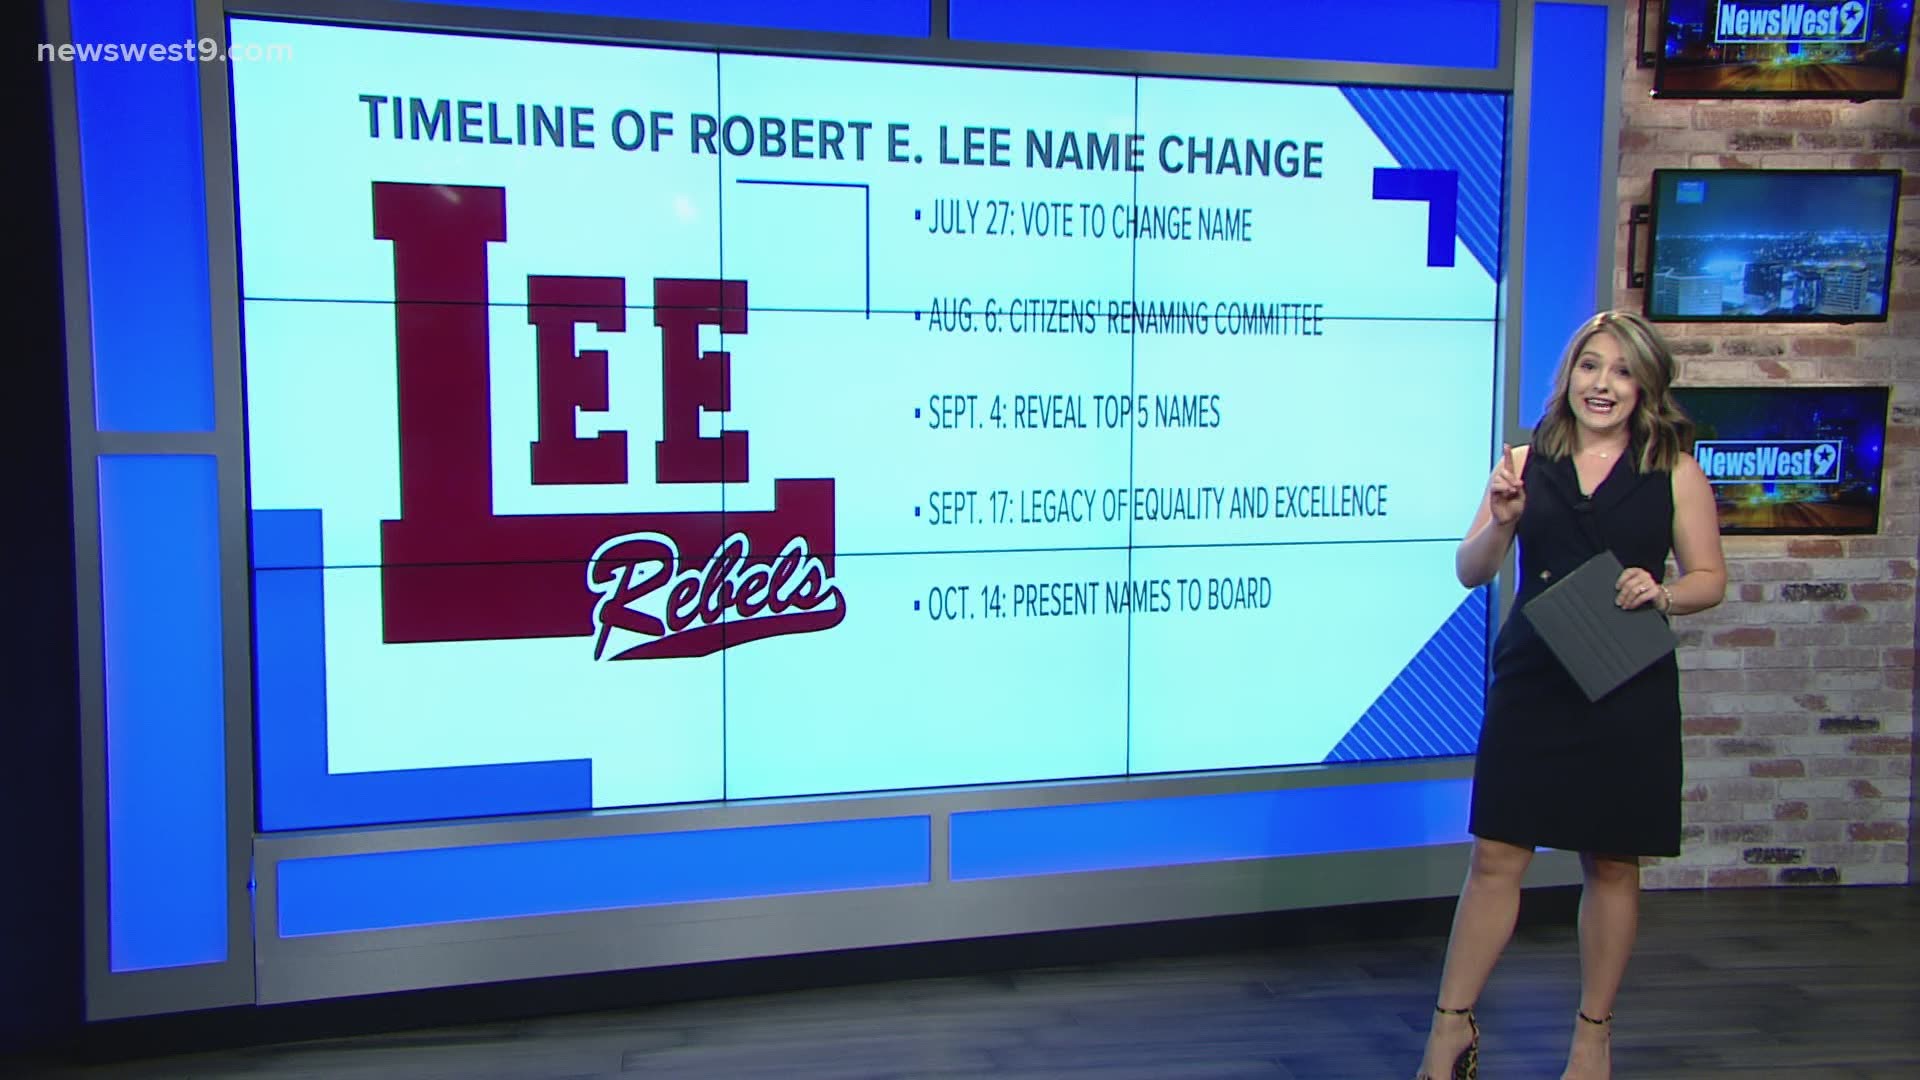 Over the past few months, Robert E. Lee High School has been battling with changing its name. Where exactly is the renaming at and where has it been?